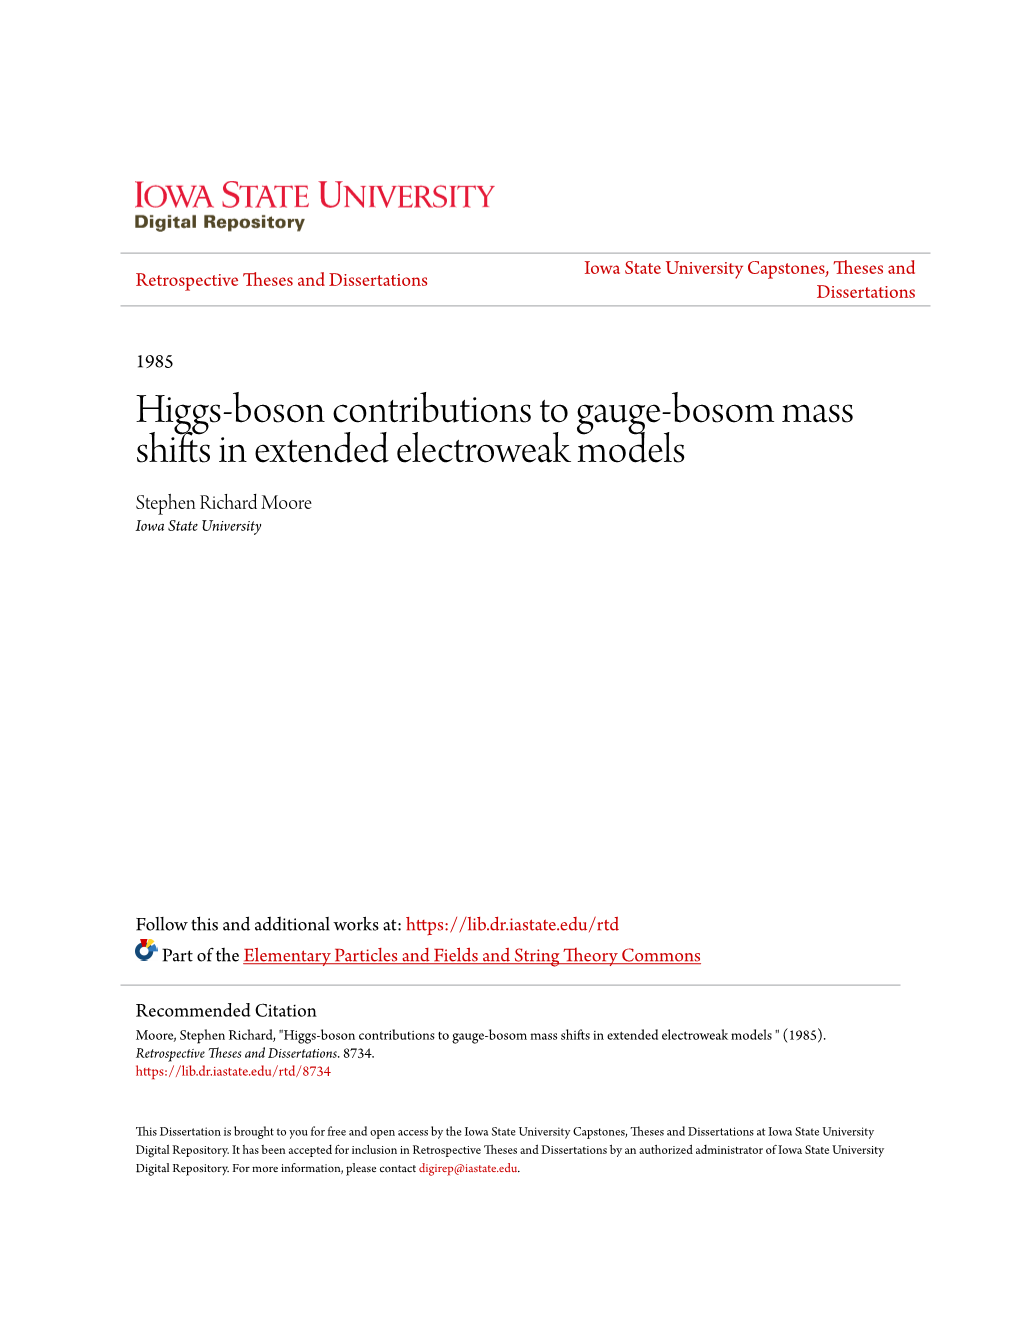 Higgs-Boson Contributions to Gauge-Bosom Mass Shifts in Extended Electroweak Models Stephen Richard Moore Iowa State University